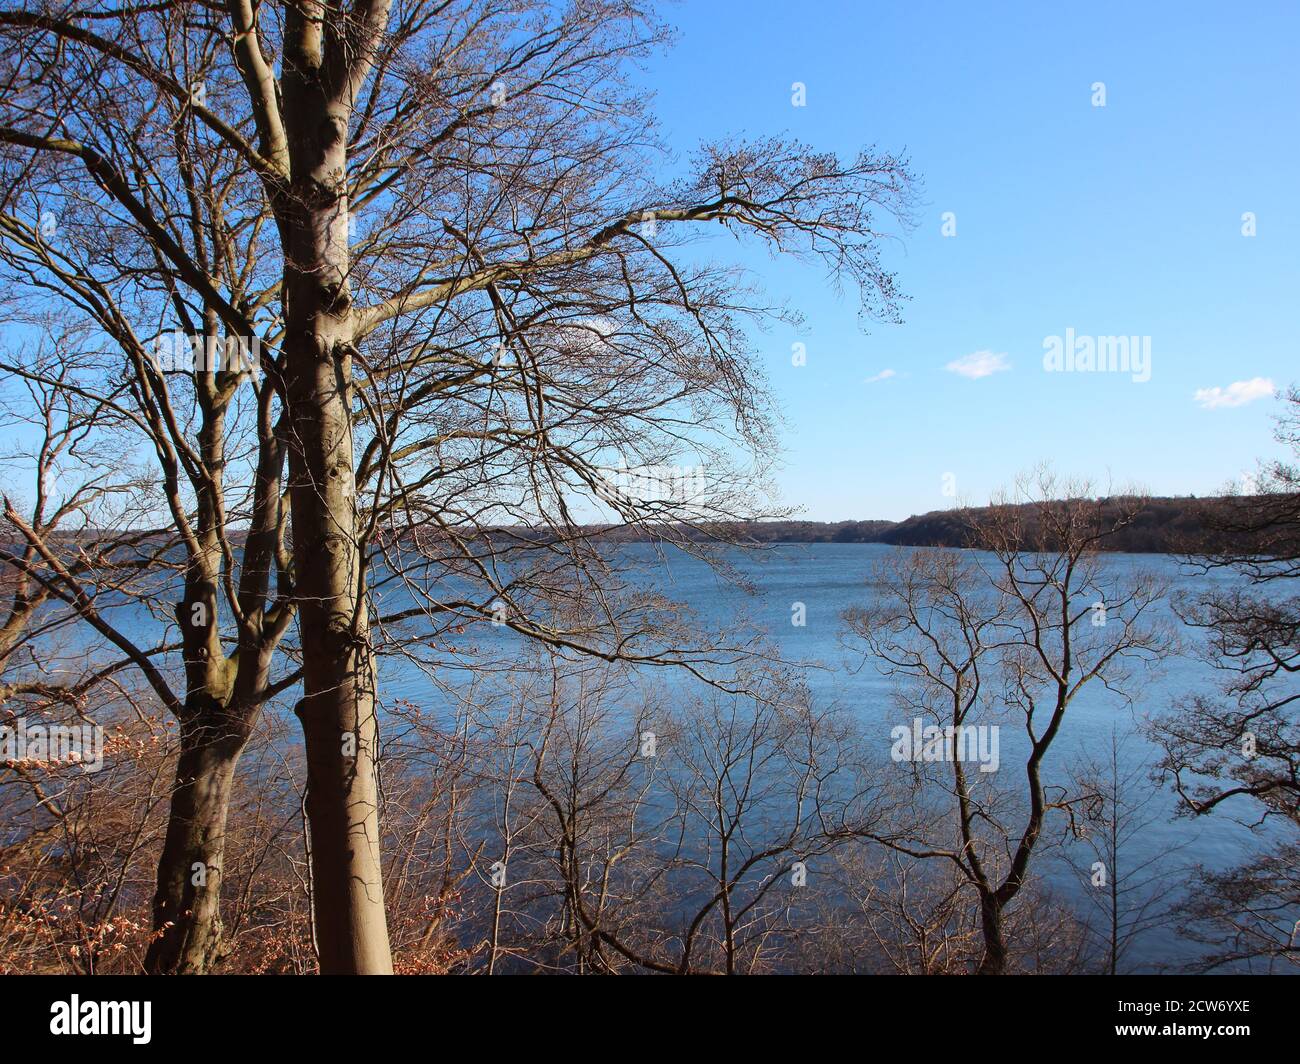 A view of a blue lake with trees in the foreground. The leaves on the trees are brown. Stock Photo